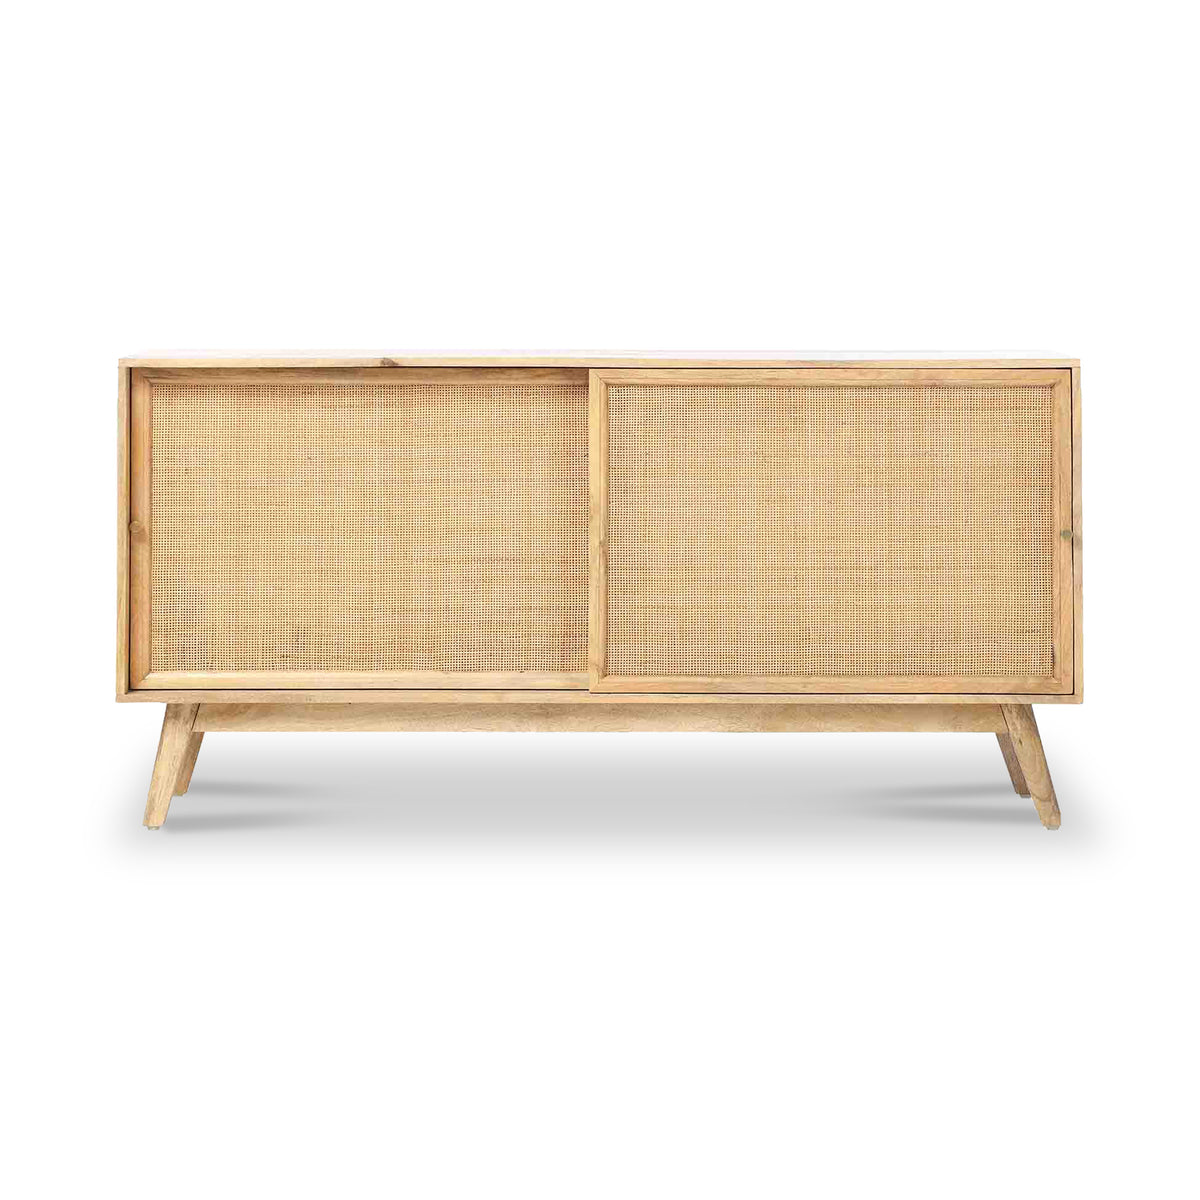 Venti Mango and Cane Large Sideboard with Sliding Doors from Roseland Furniture